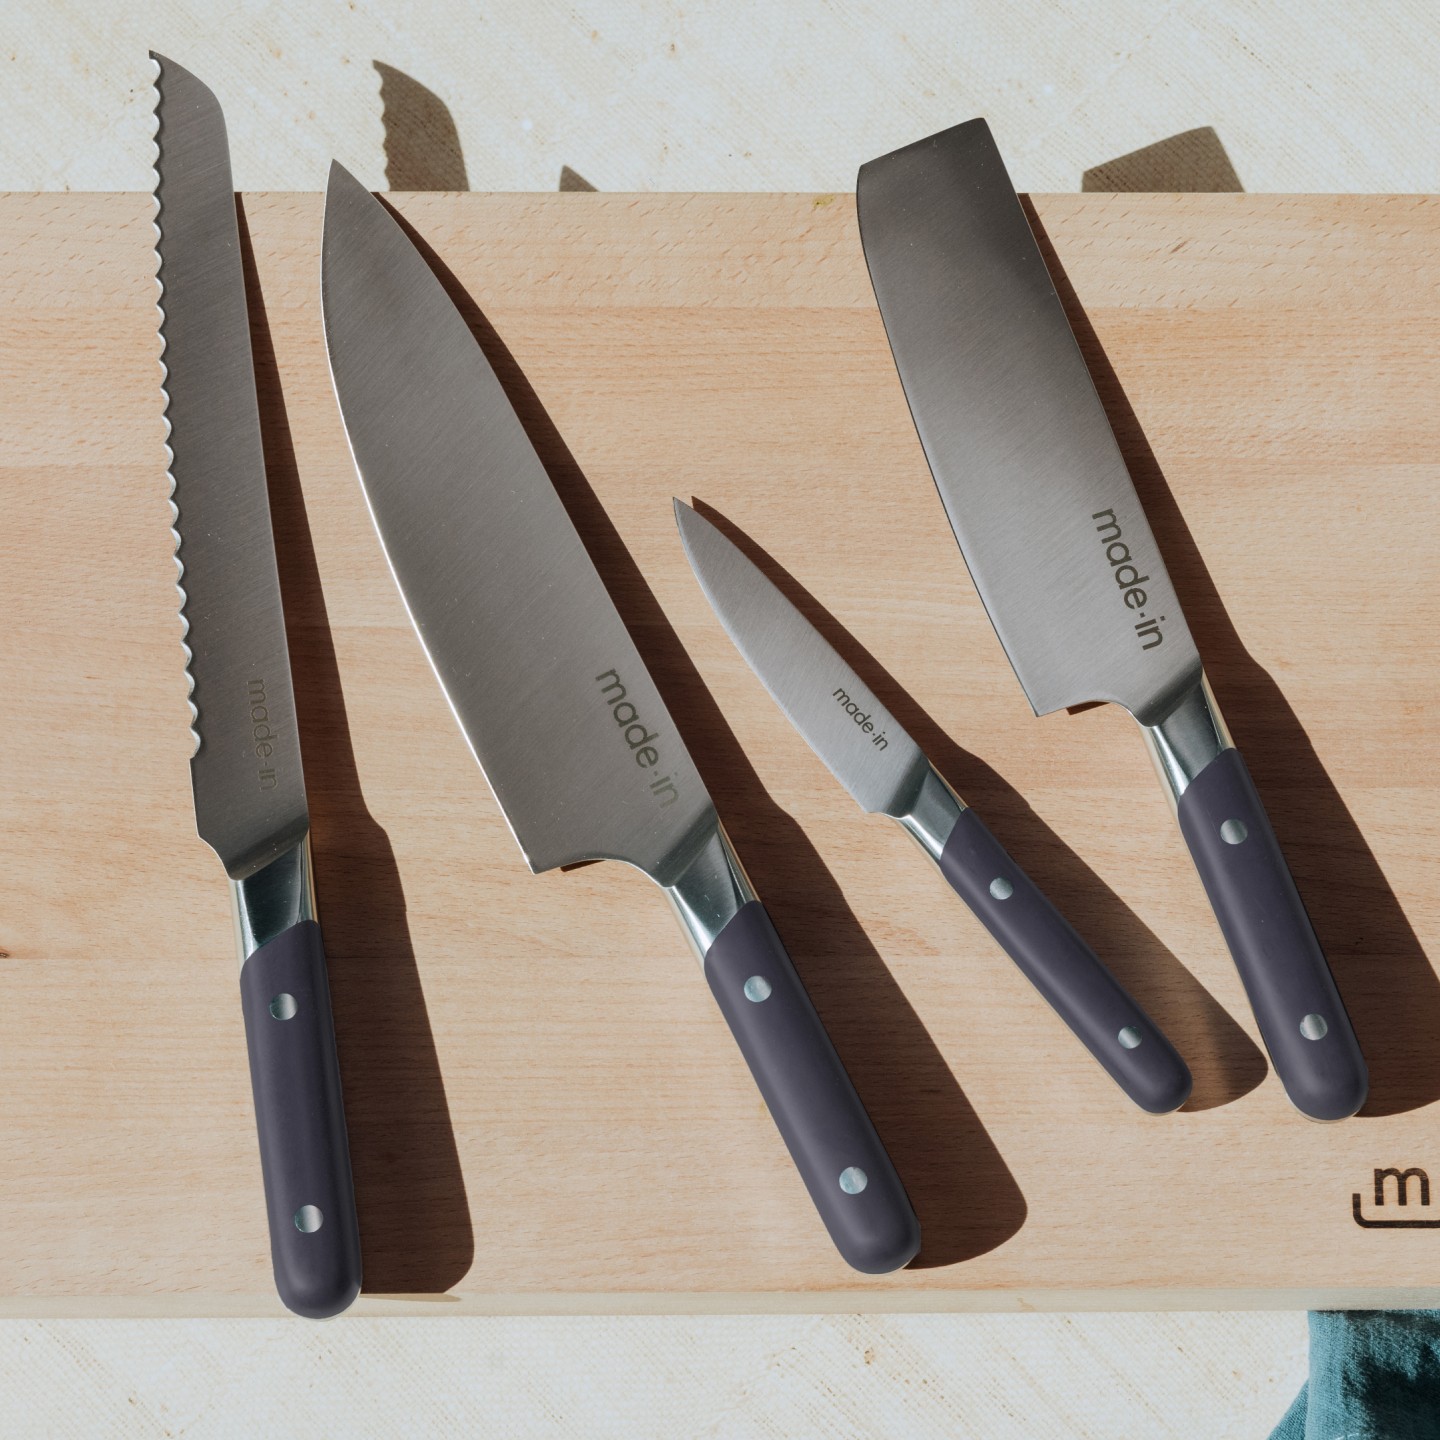 https://video-images.vice.com//products/63e674617cd7e6cf4989498a/gallery-image/1676047459687-made-in-knife-set-harbour-blue5.jpeg?crop=1xw:1xh;center,center